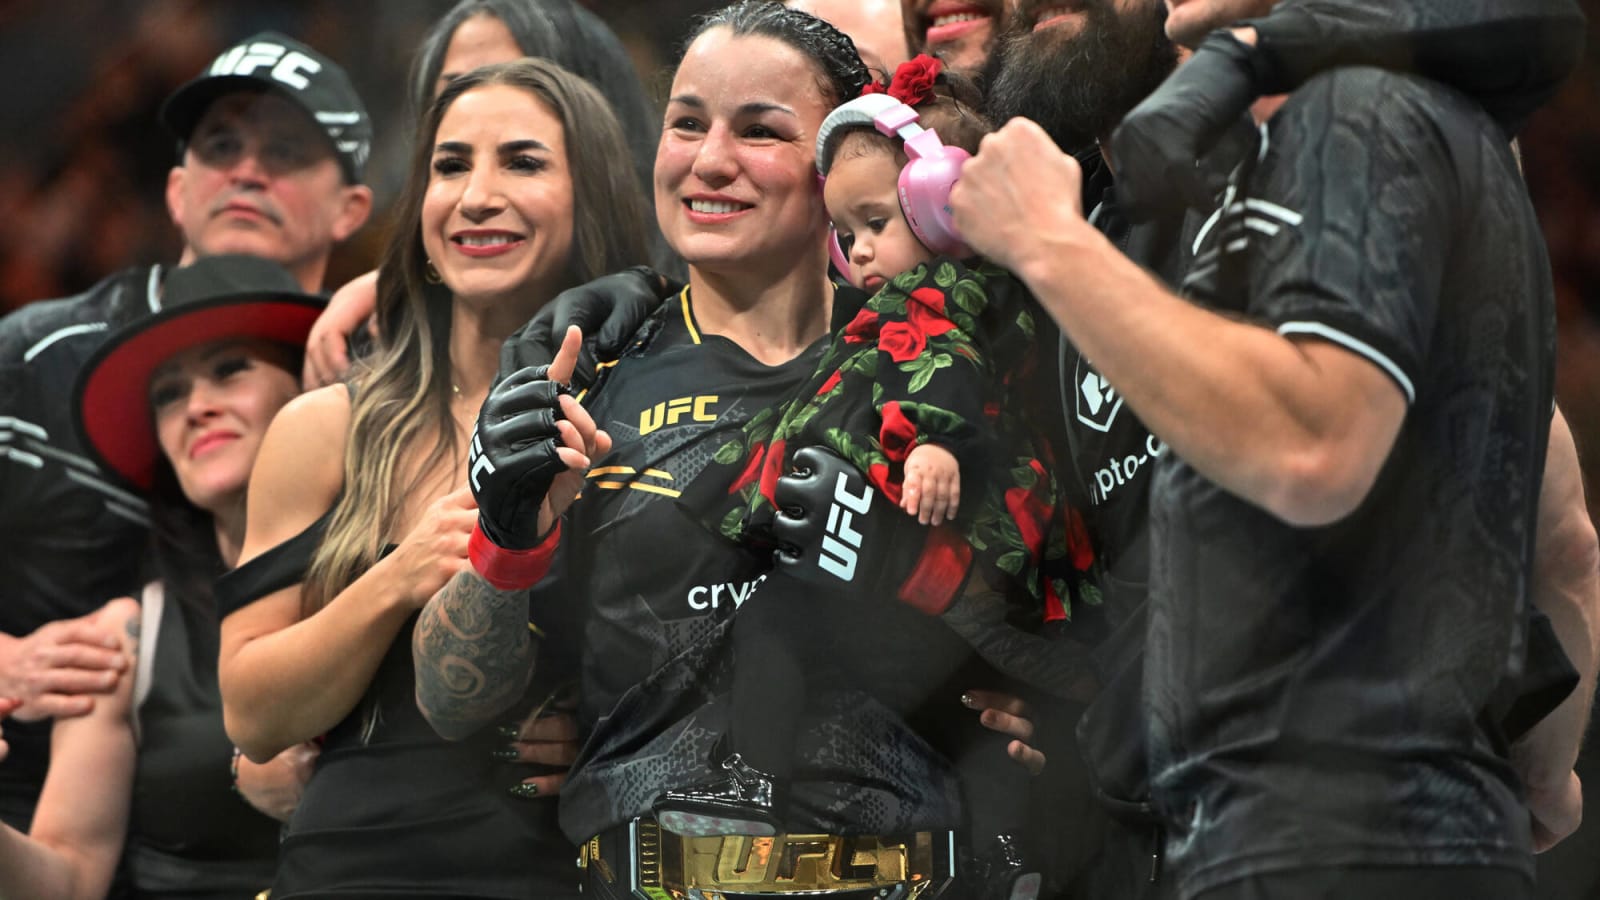 After becoming UFC champion, what’s next for Raquel Pennington?